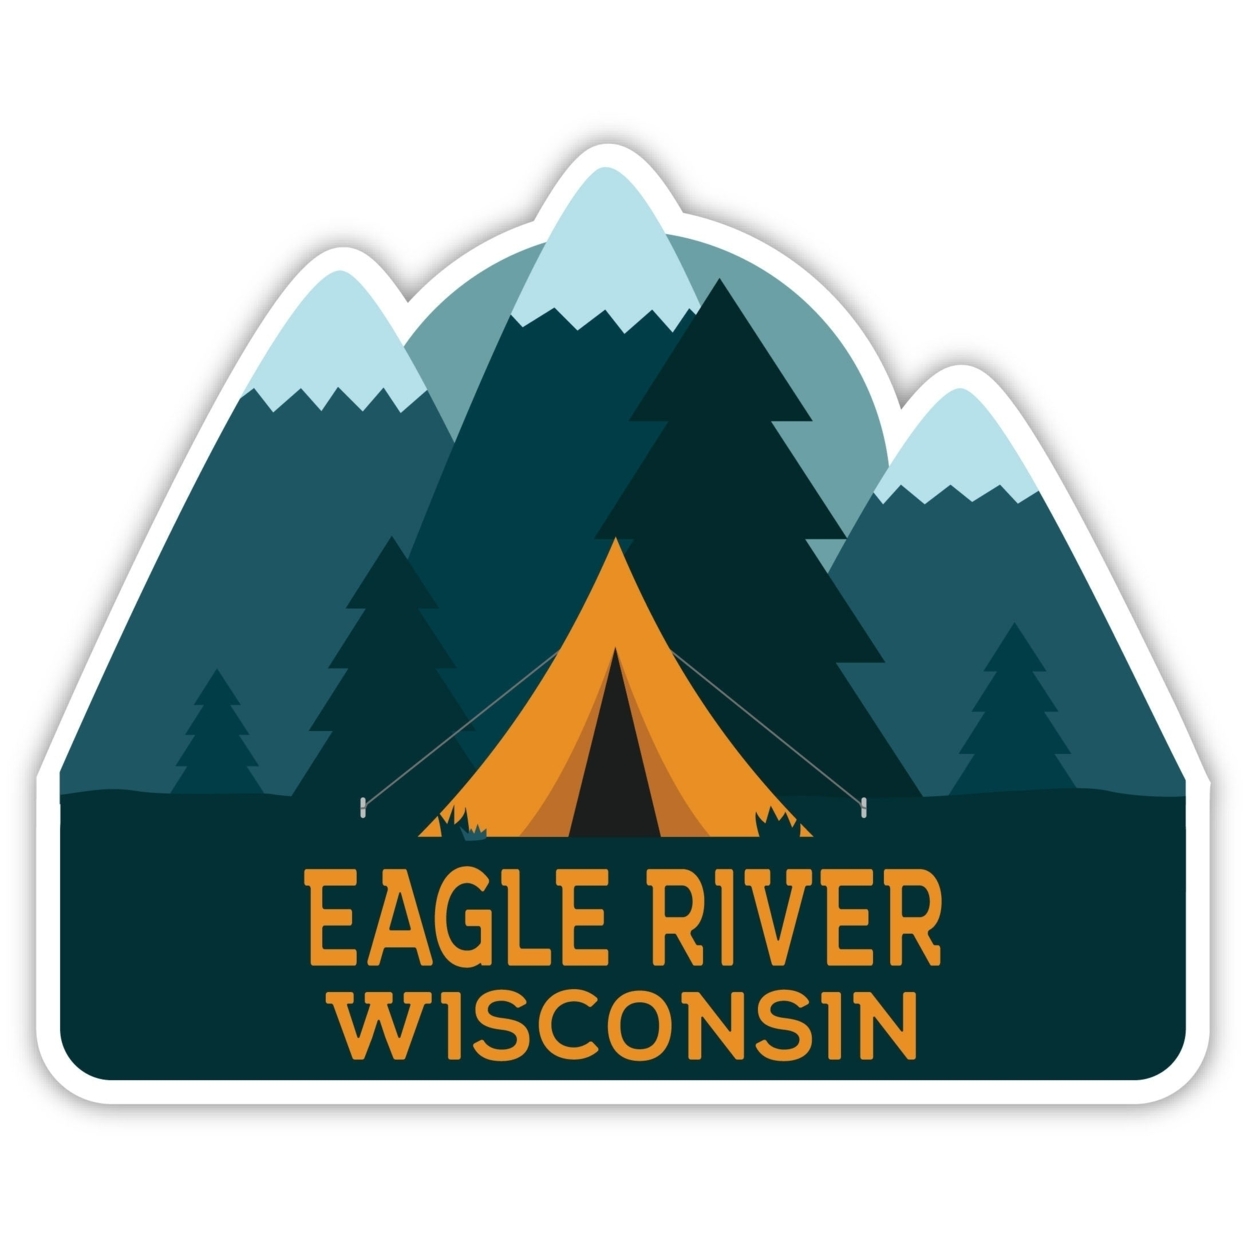 Eagle River Wisconsin Souvenir Decorative Stickers (Choose Theme And Size) - 4-Pack, 2-Inch, Camp Life